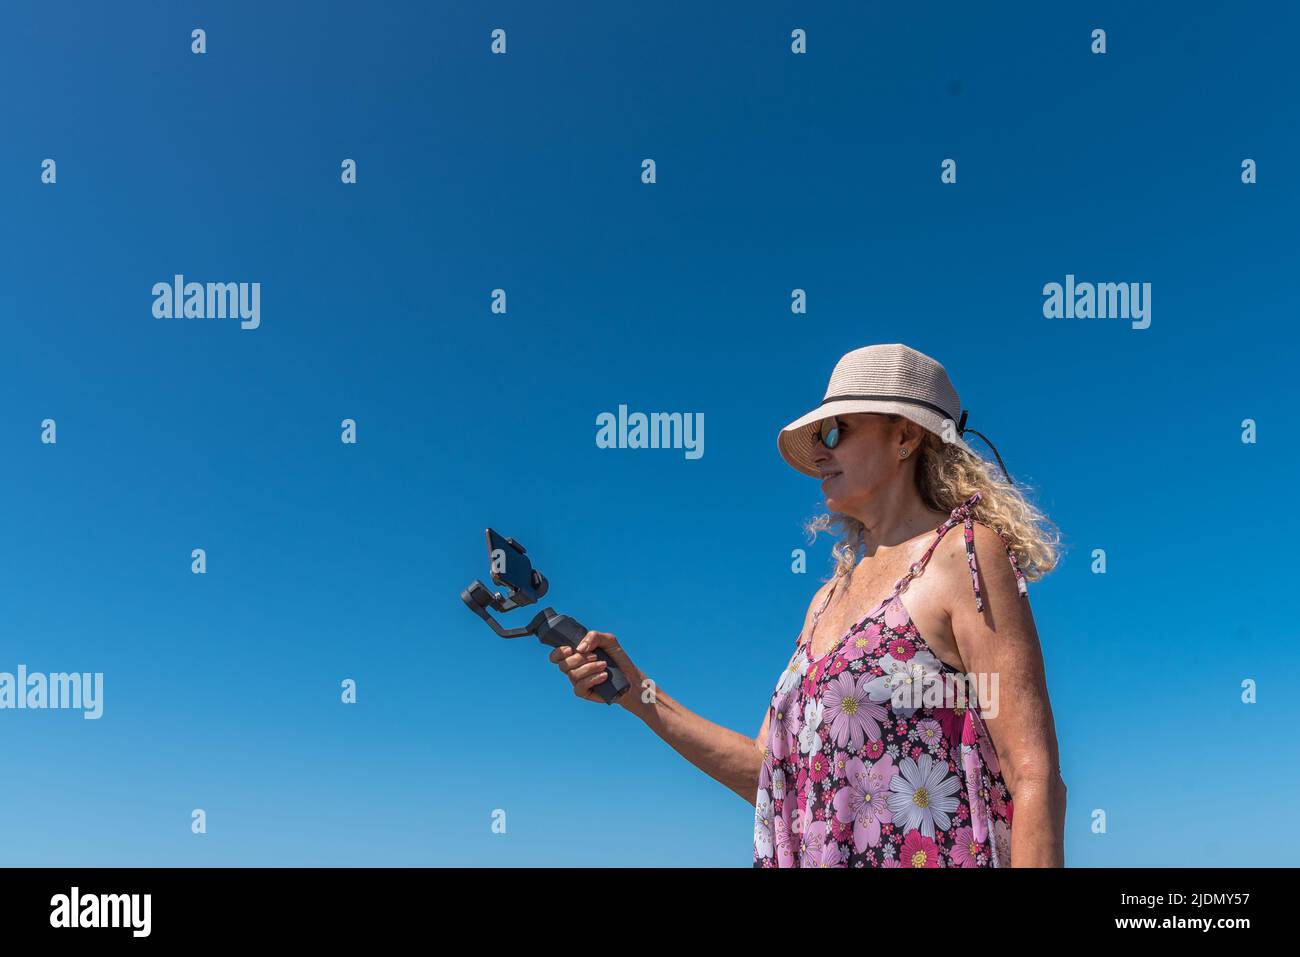 Low angle view of a woman recording with a mobile outdoors with the blue sky in the background Stock Photo